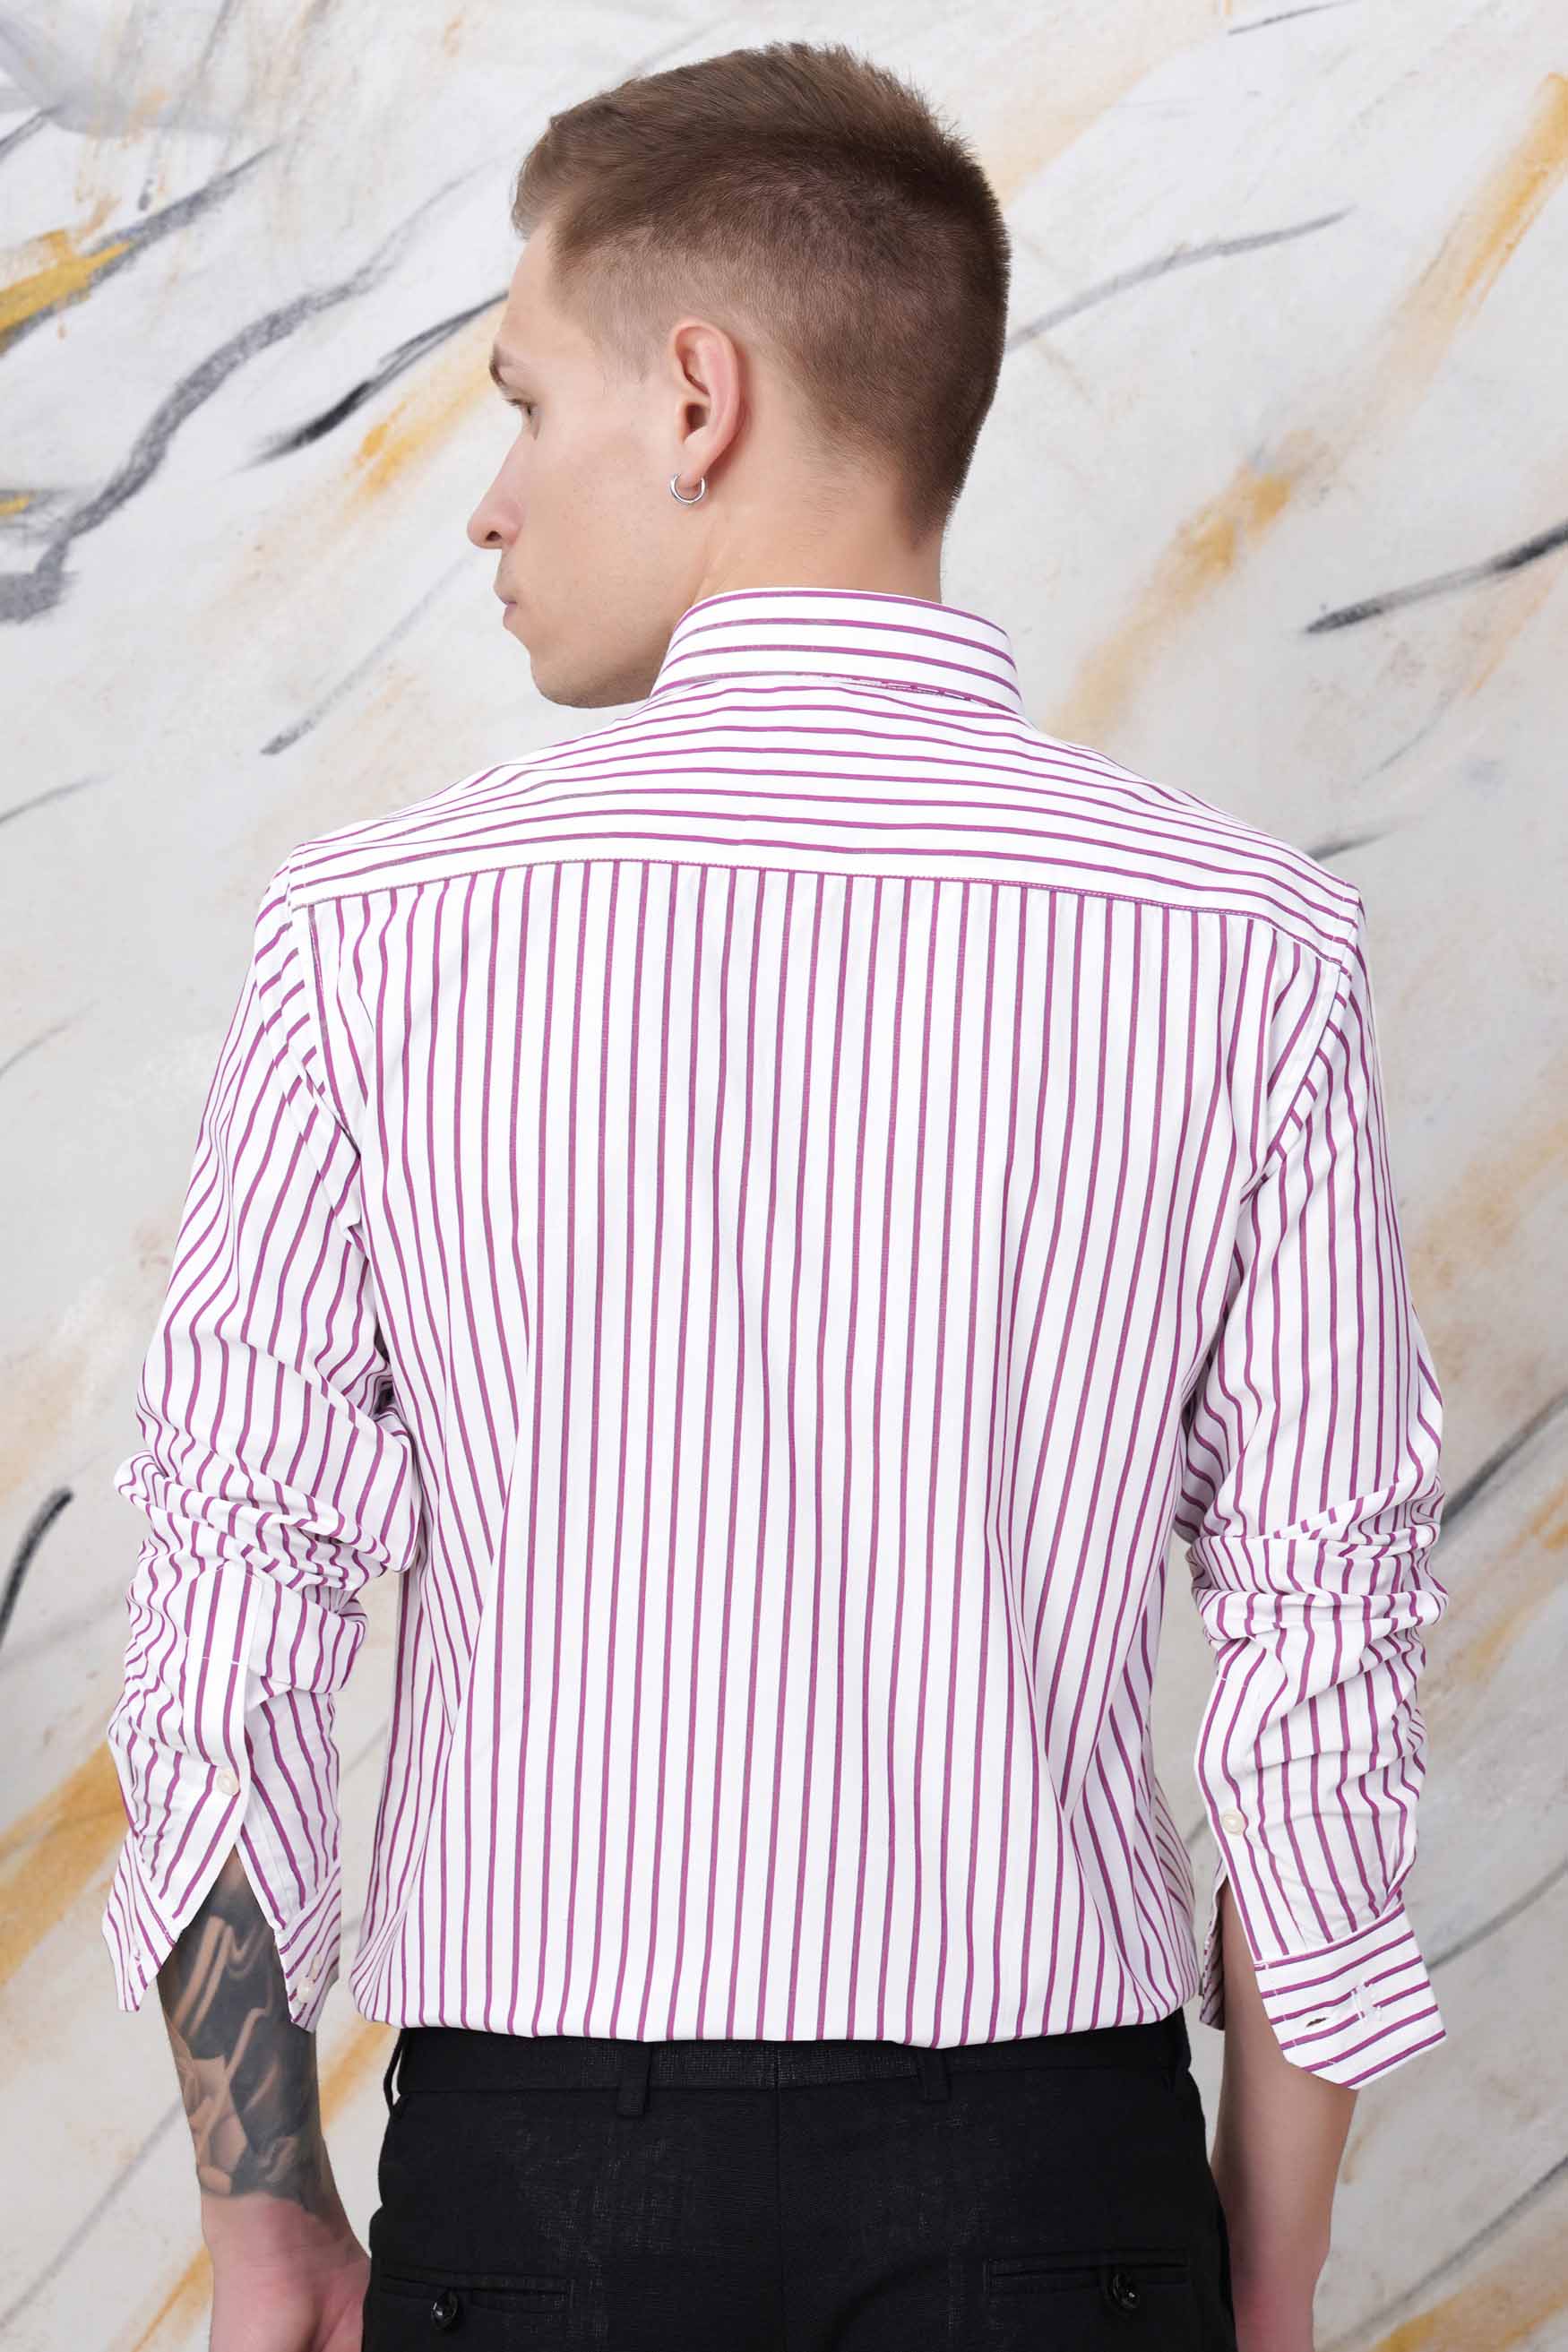 Bright White and Pansy Pink Striped Premium Cotton Shirt